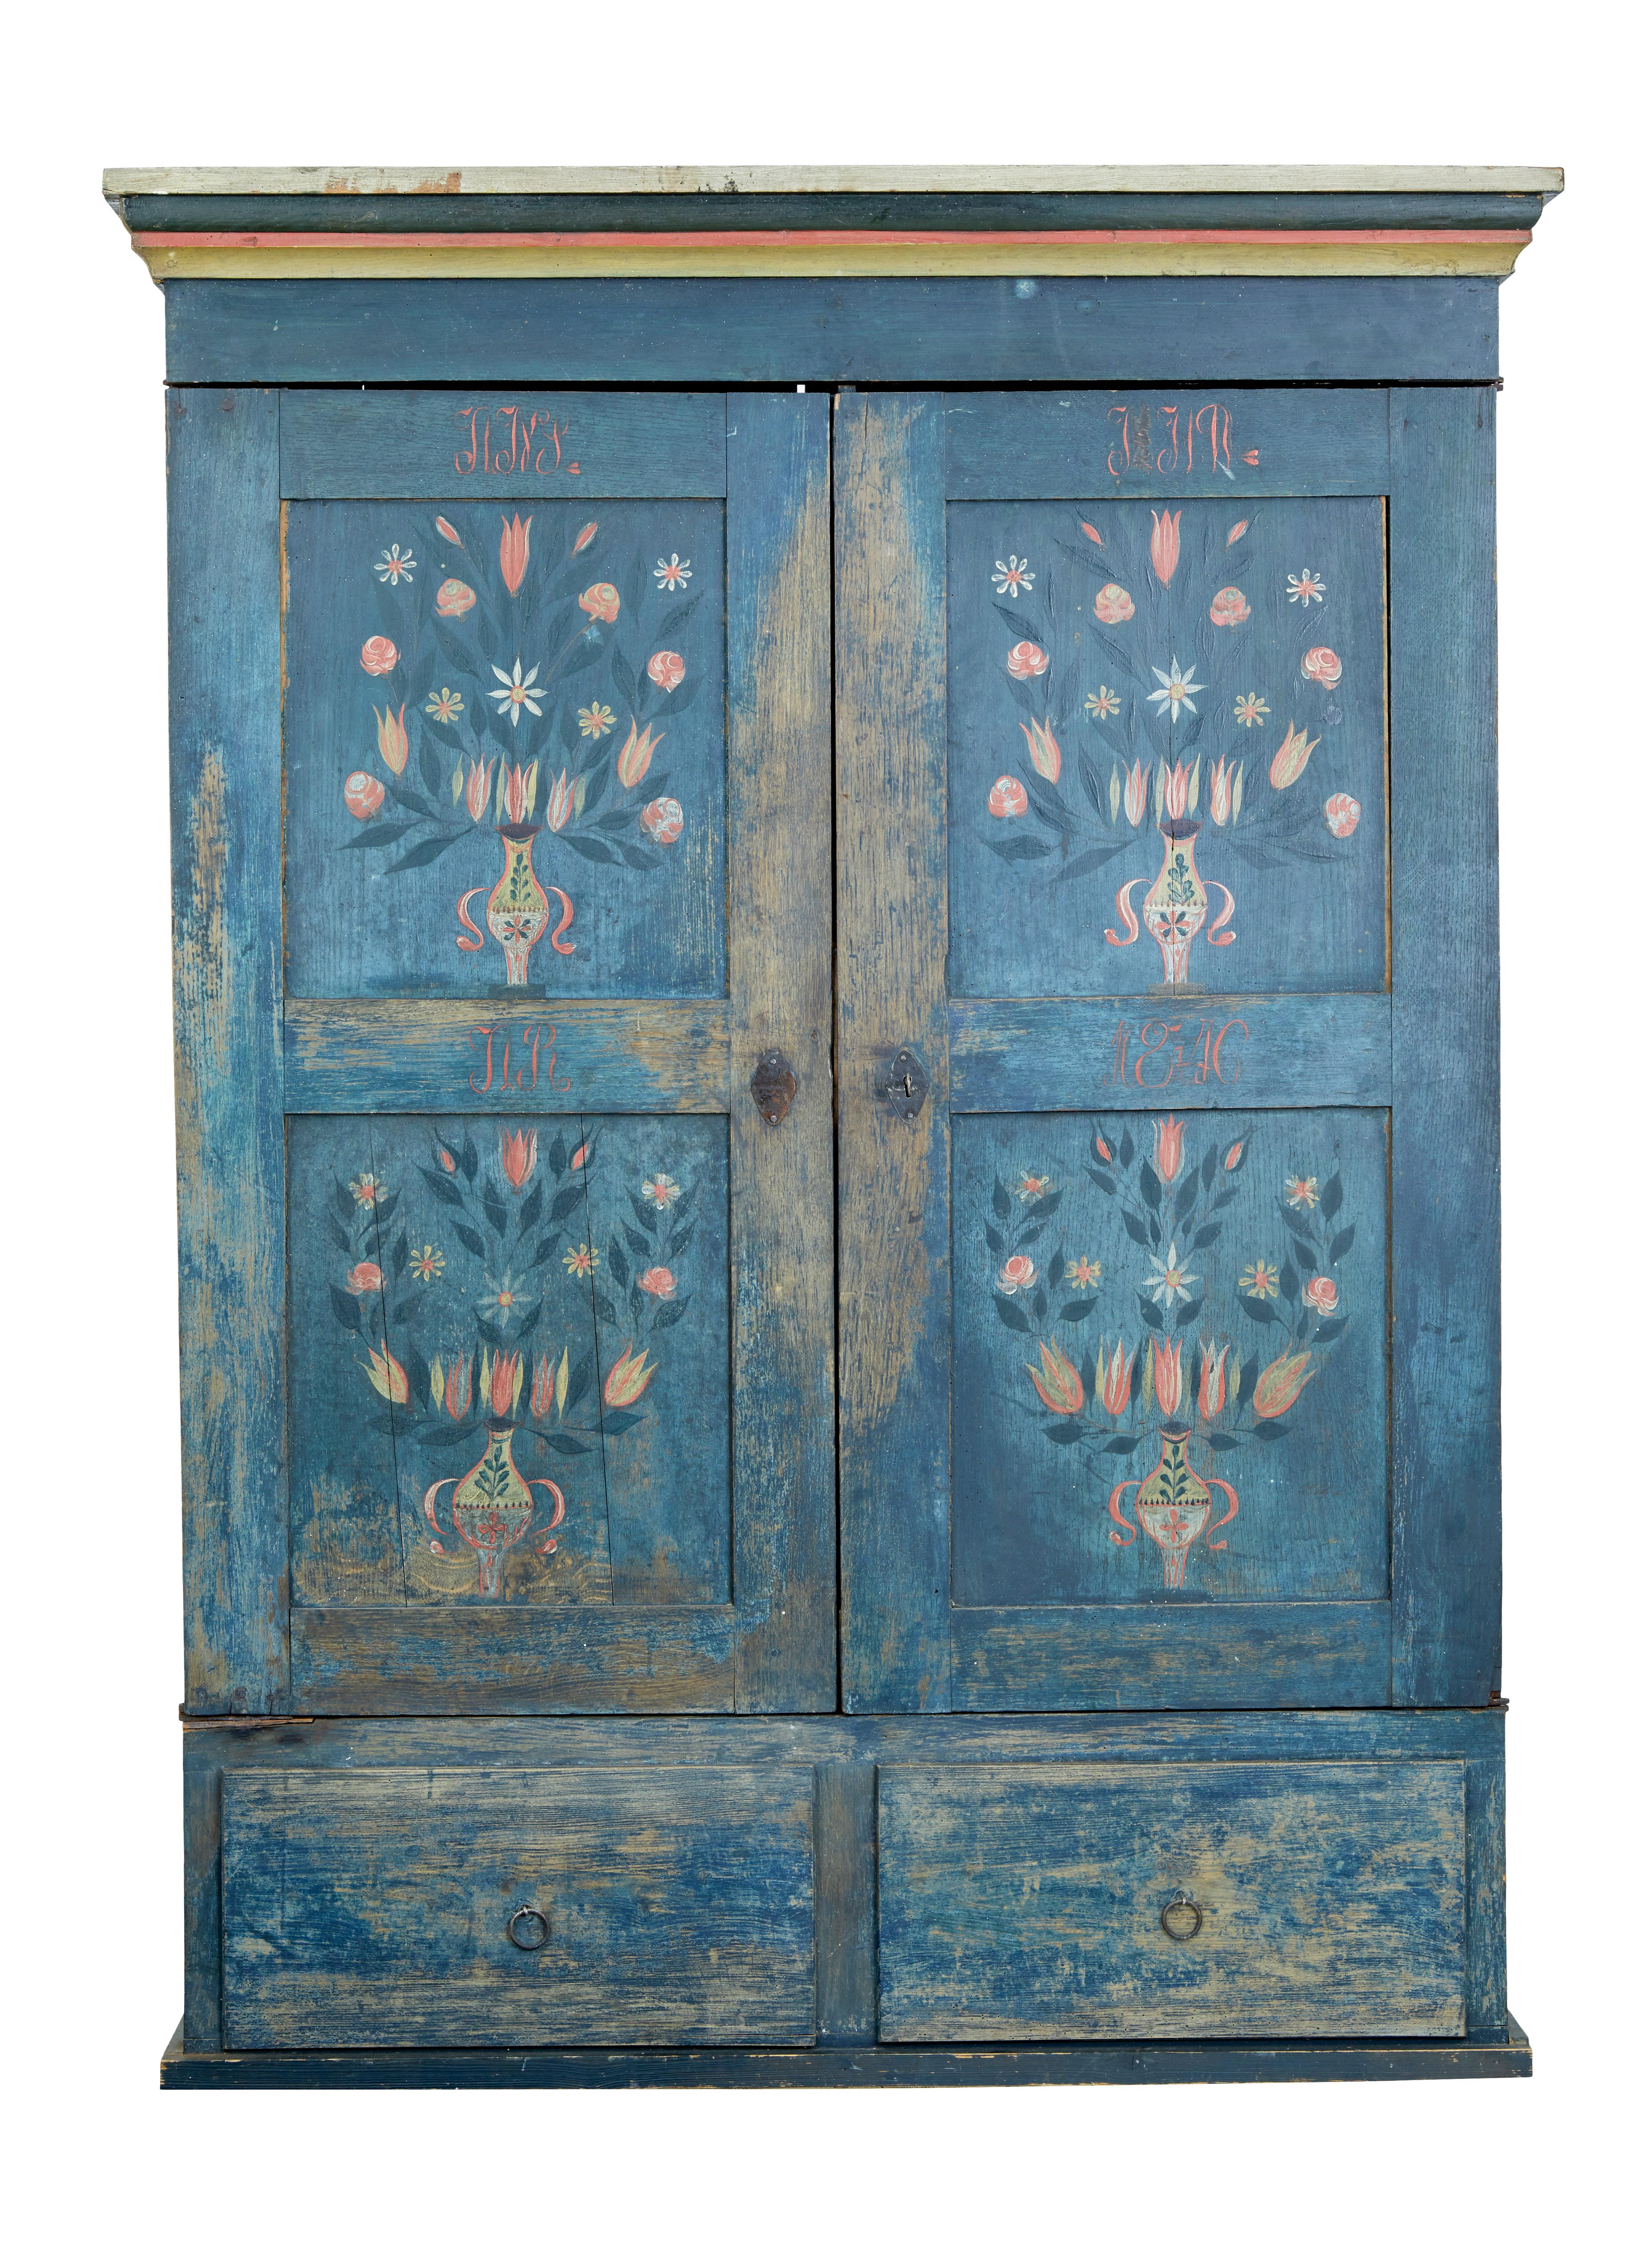 Beautiful original painted Folk Art Swedish wardrobe, circa 1850.

Presented in its original blue color scheme with hand painted flowers on each door panel.

Double doors open to a central partition with 3 shelves to the left hand side, and